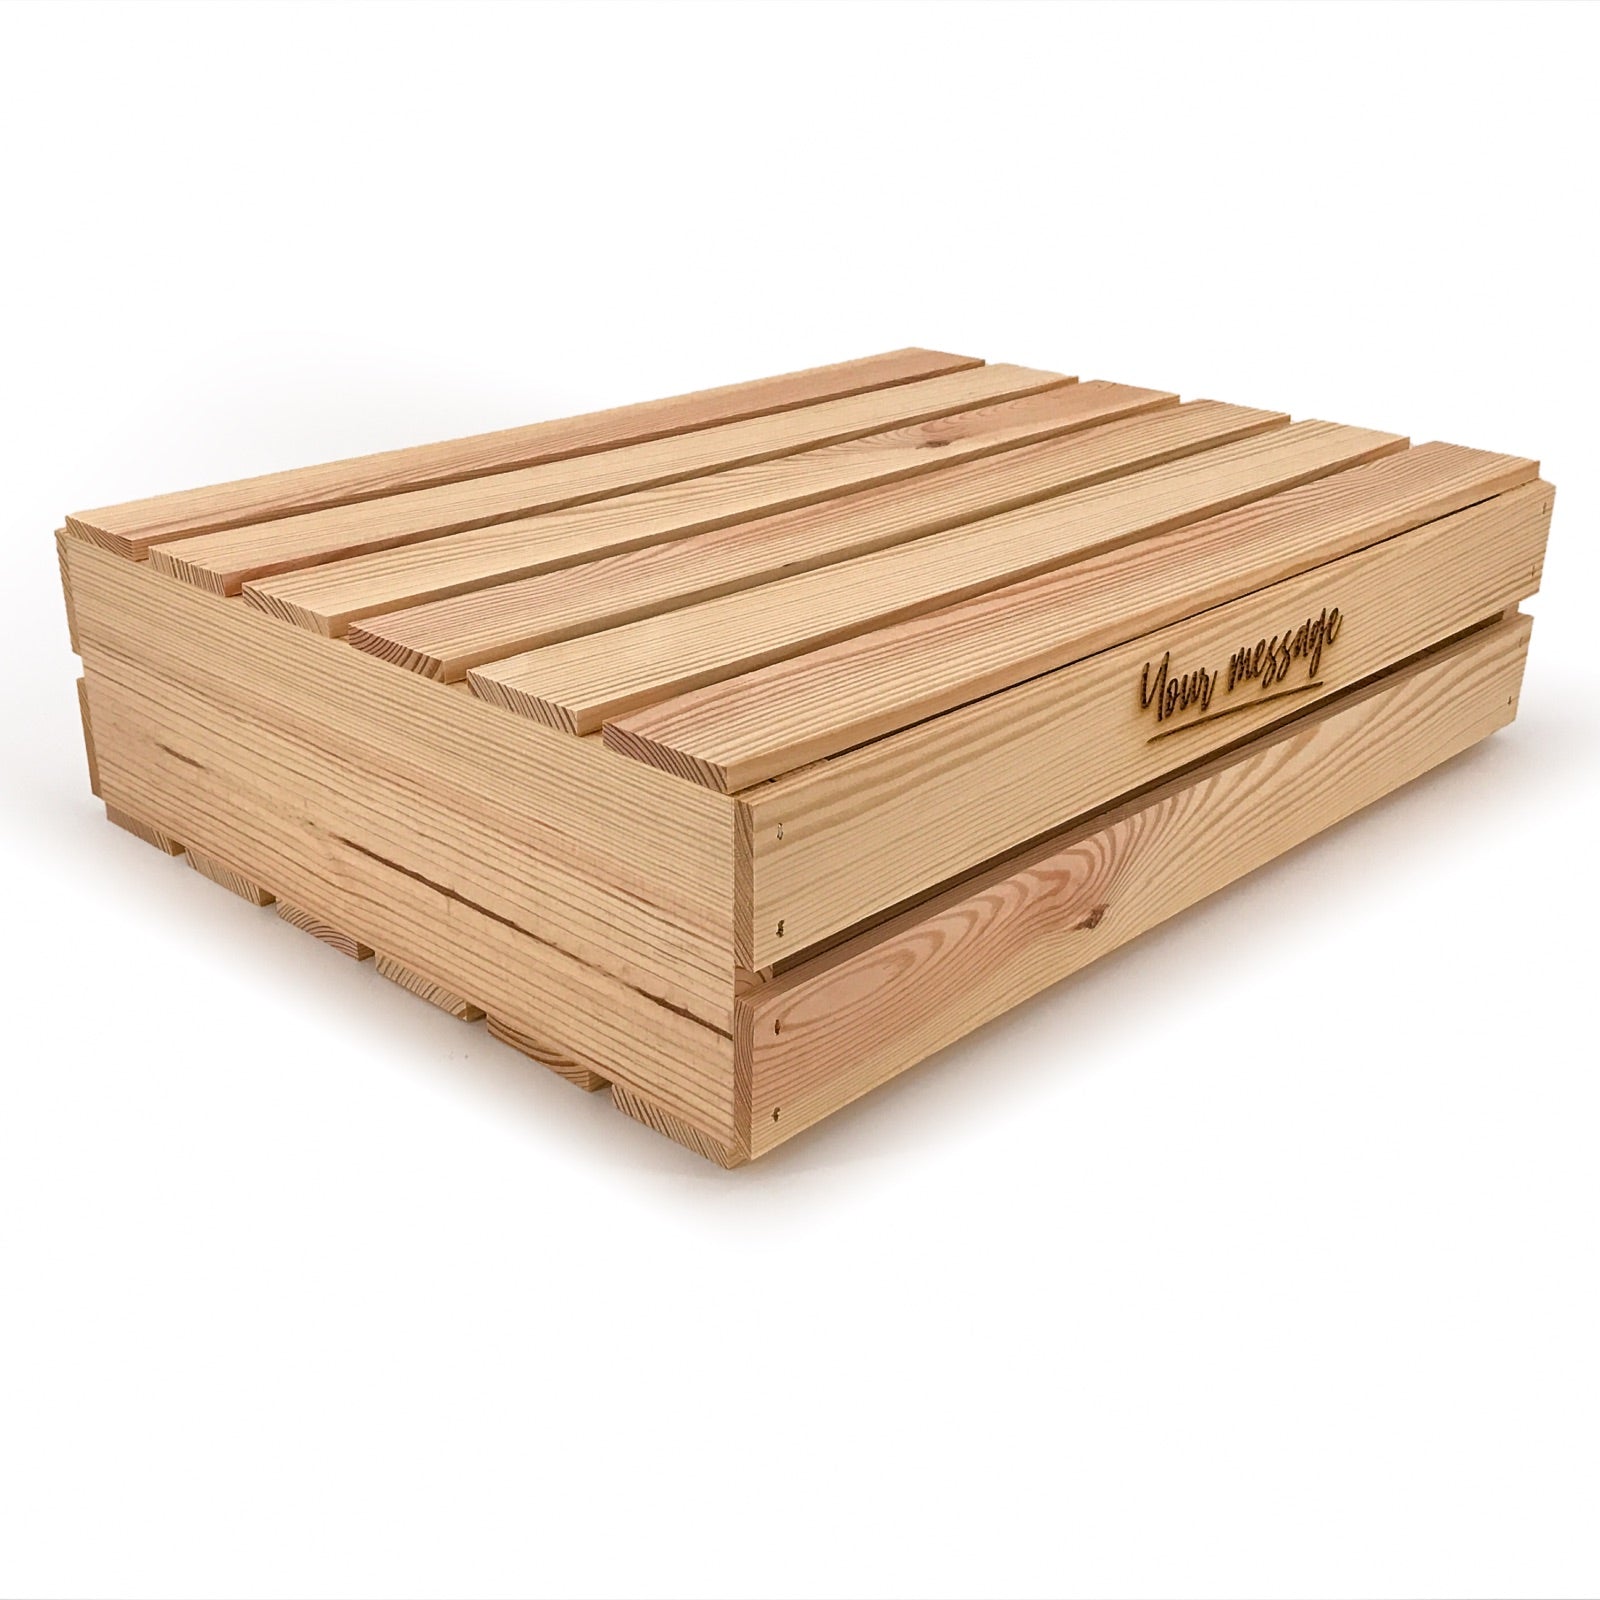 Small wooden crate with lid and custom message 22x17x5.25, 6-WS-22-17-5.25-ST-NW-LL, 12-WS-22-17-5.25-ST-NW-LL, 24-WS-22-17-5.25-ST-NW-LL, 48-WS-22-17-5.25-ST-NW-LL, 96-WS-22-17-5.25-ST-NW-LL